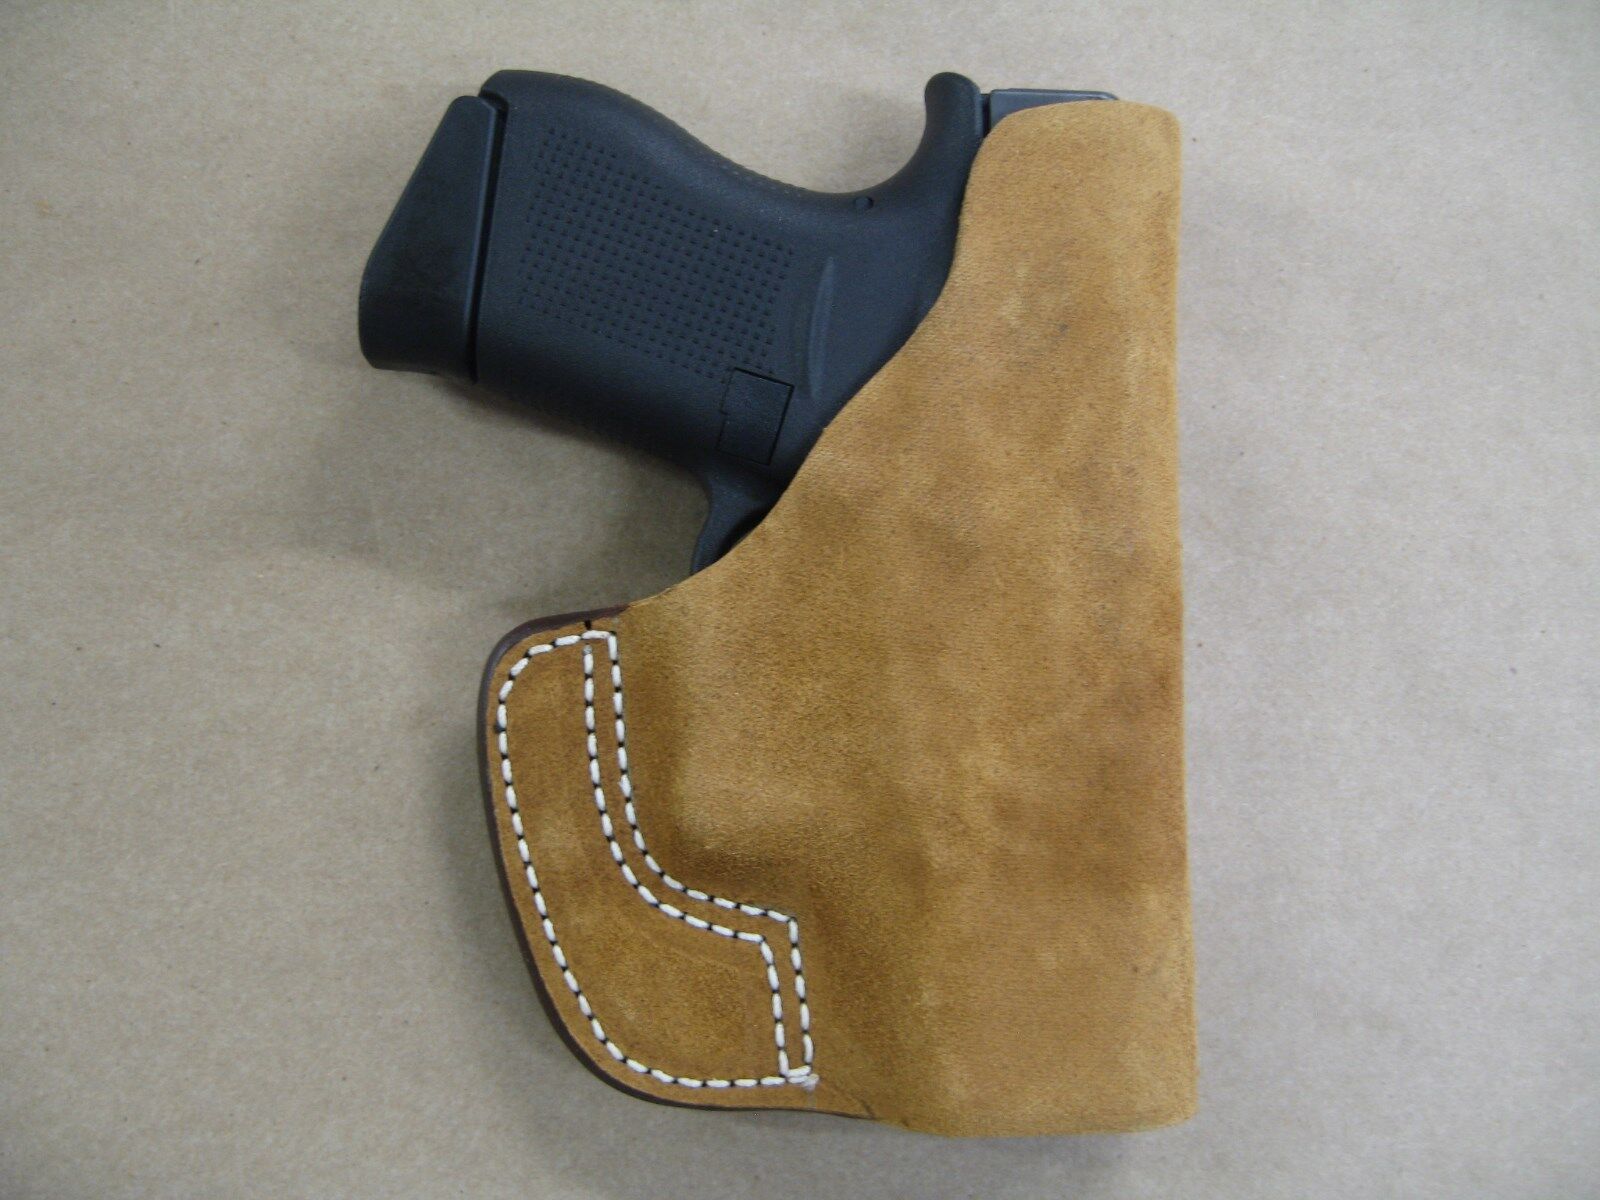 Azula Leather In The New Orleans Mall Pocket ITP Concealment For.. CCW C Holster Chicago Mall